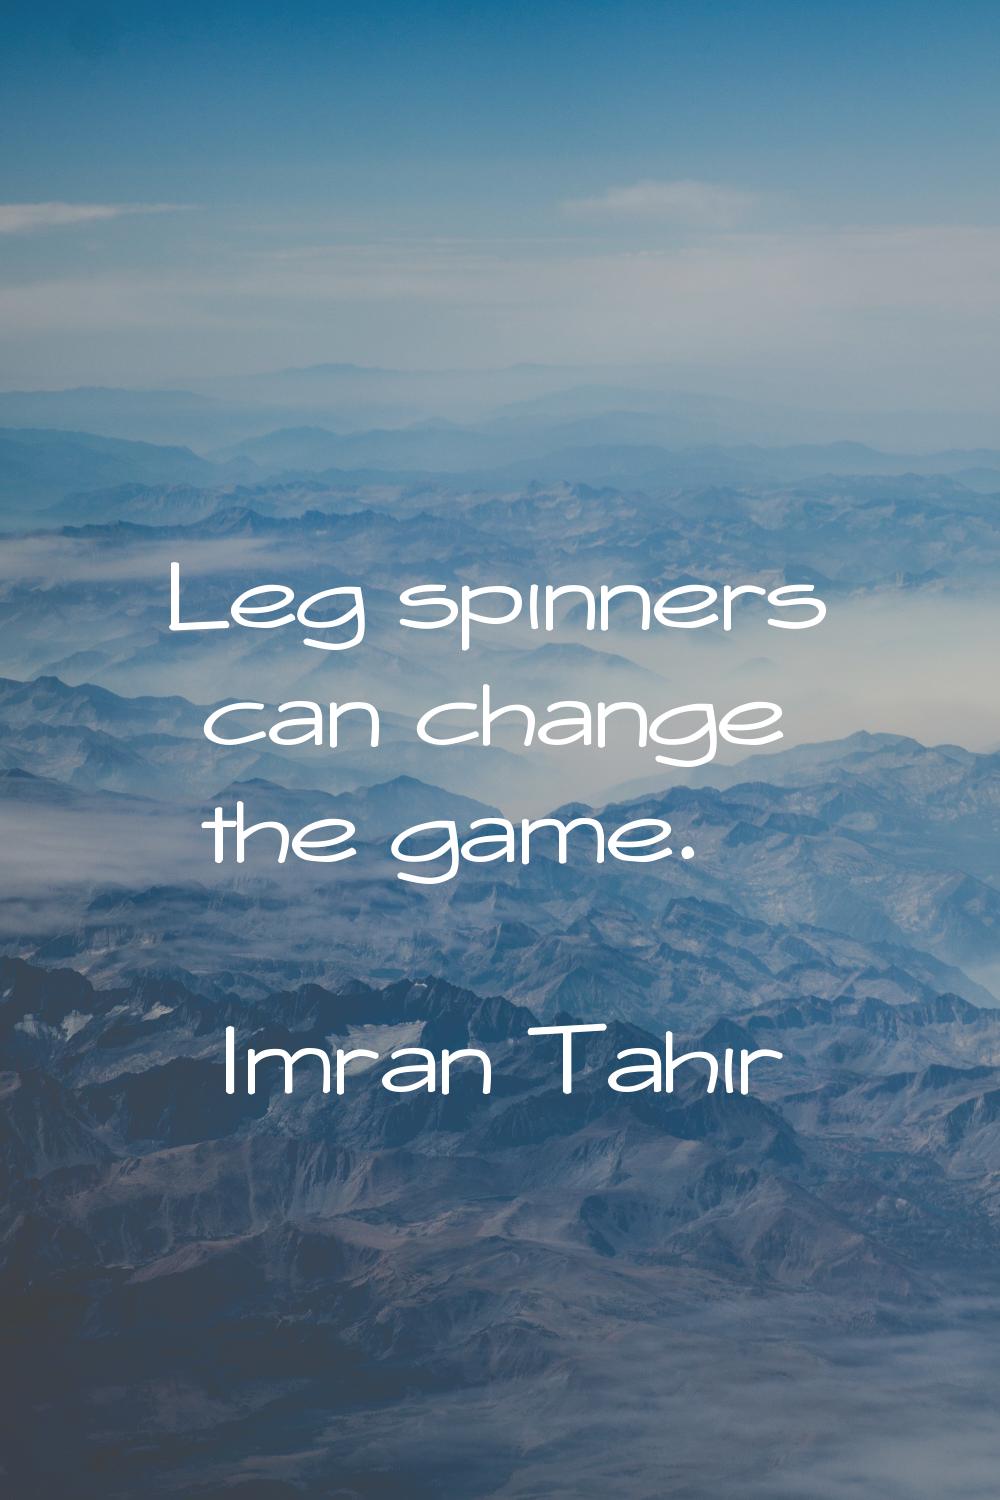 Leg spinners can change the game.